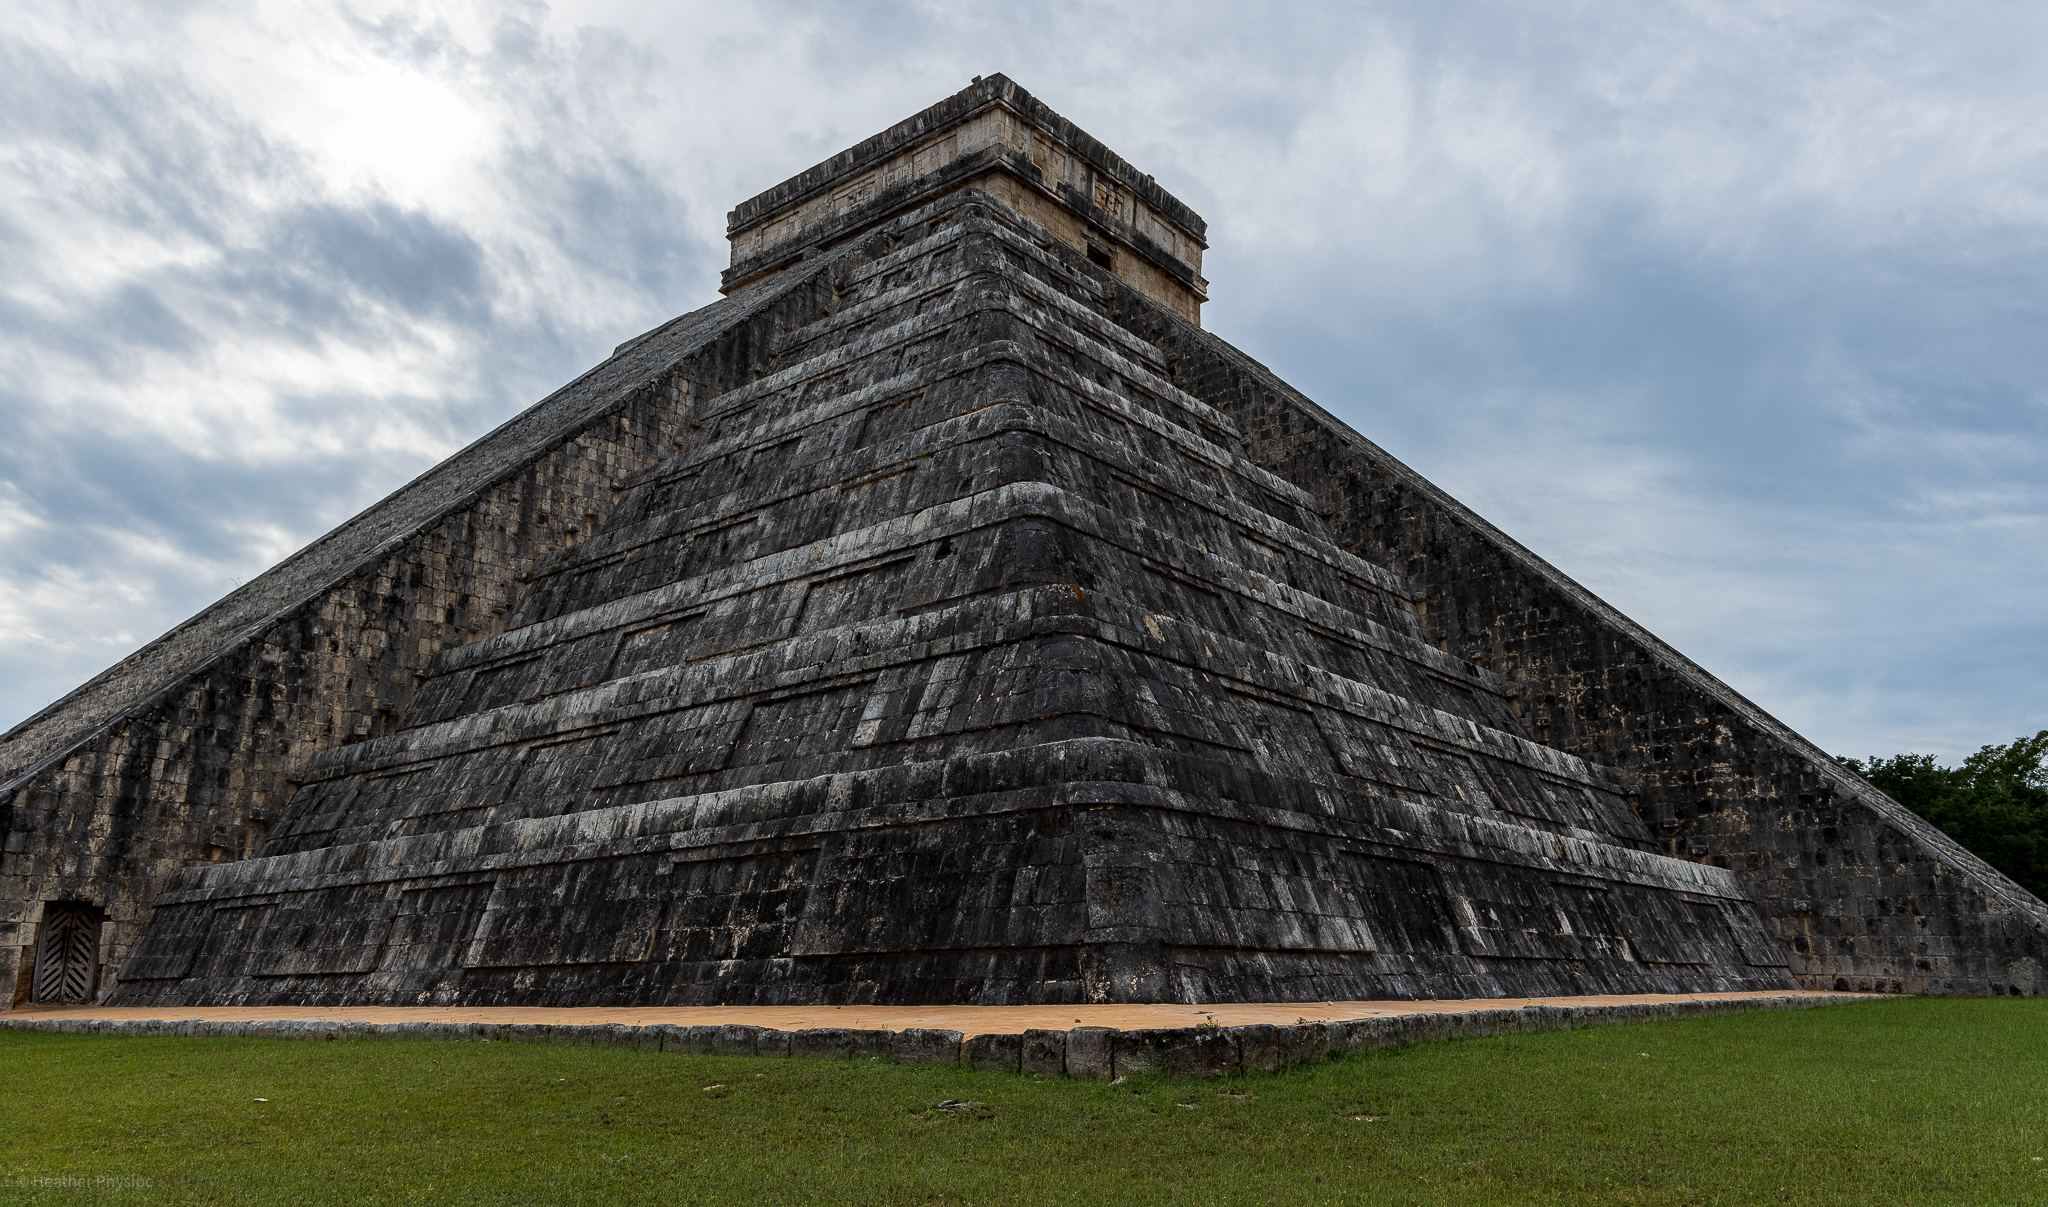 The image showcases the iconic El Castillo, also known as the Temple of Kukulcan, at Chichén Itzá. This massive step pyramid stands against a cloudy sky, illustrating the grandeur of ancient Mayan architecture and the site's status as one of the New Seven Wonders of the World in Yucatan, Mexico.